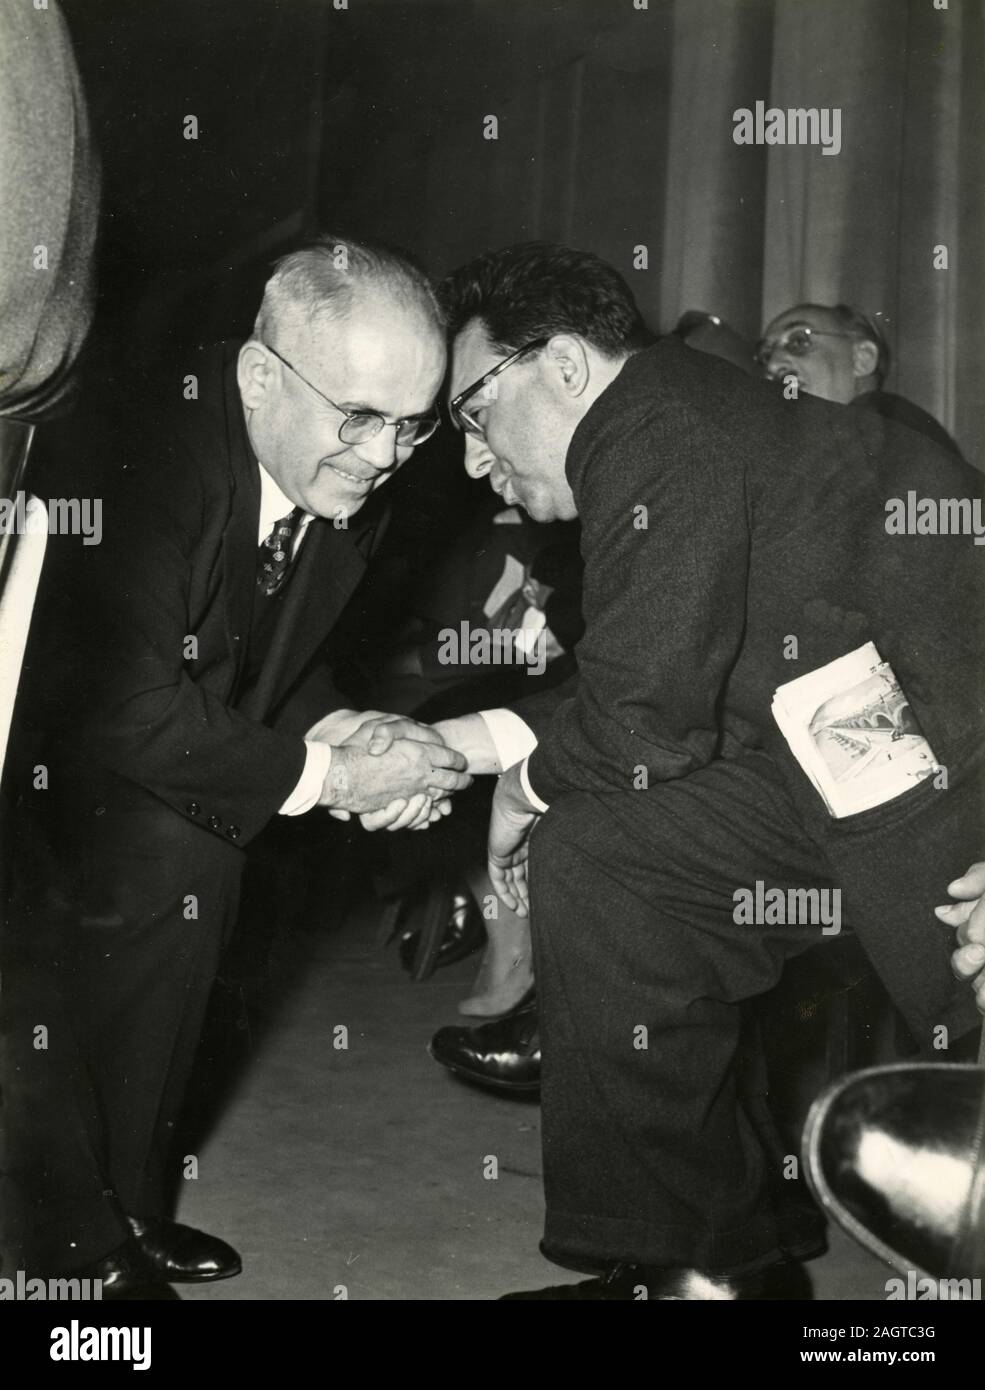 Italian politician Giulio Pastore and US trade unionist Irving Brown at the II CISL international congress, Rome, Italy 1950s Stock Photo